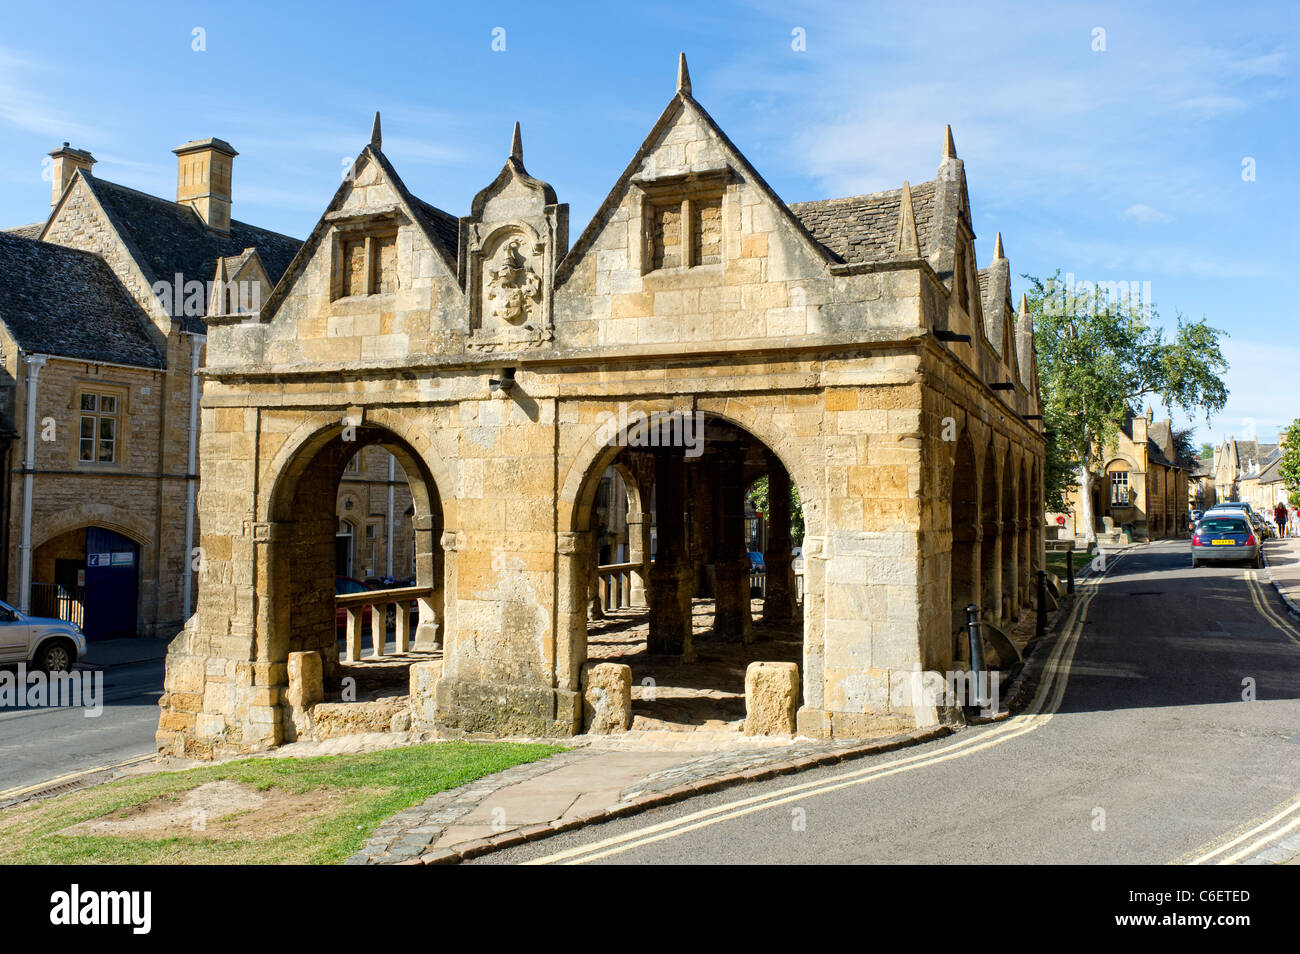 The old market building in Chipping Campden, Gloucestershire, England Stock Photo